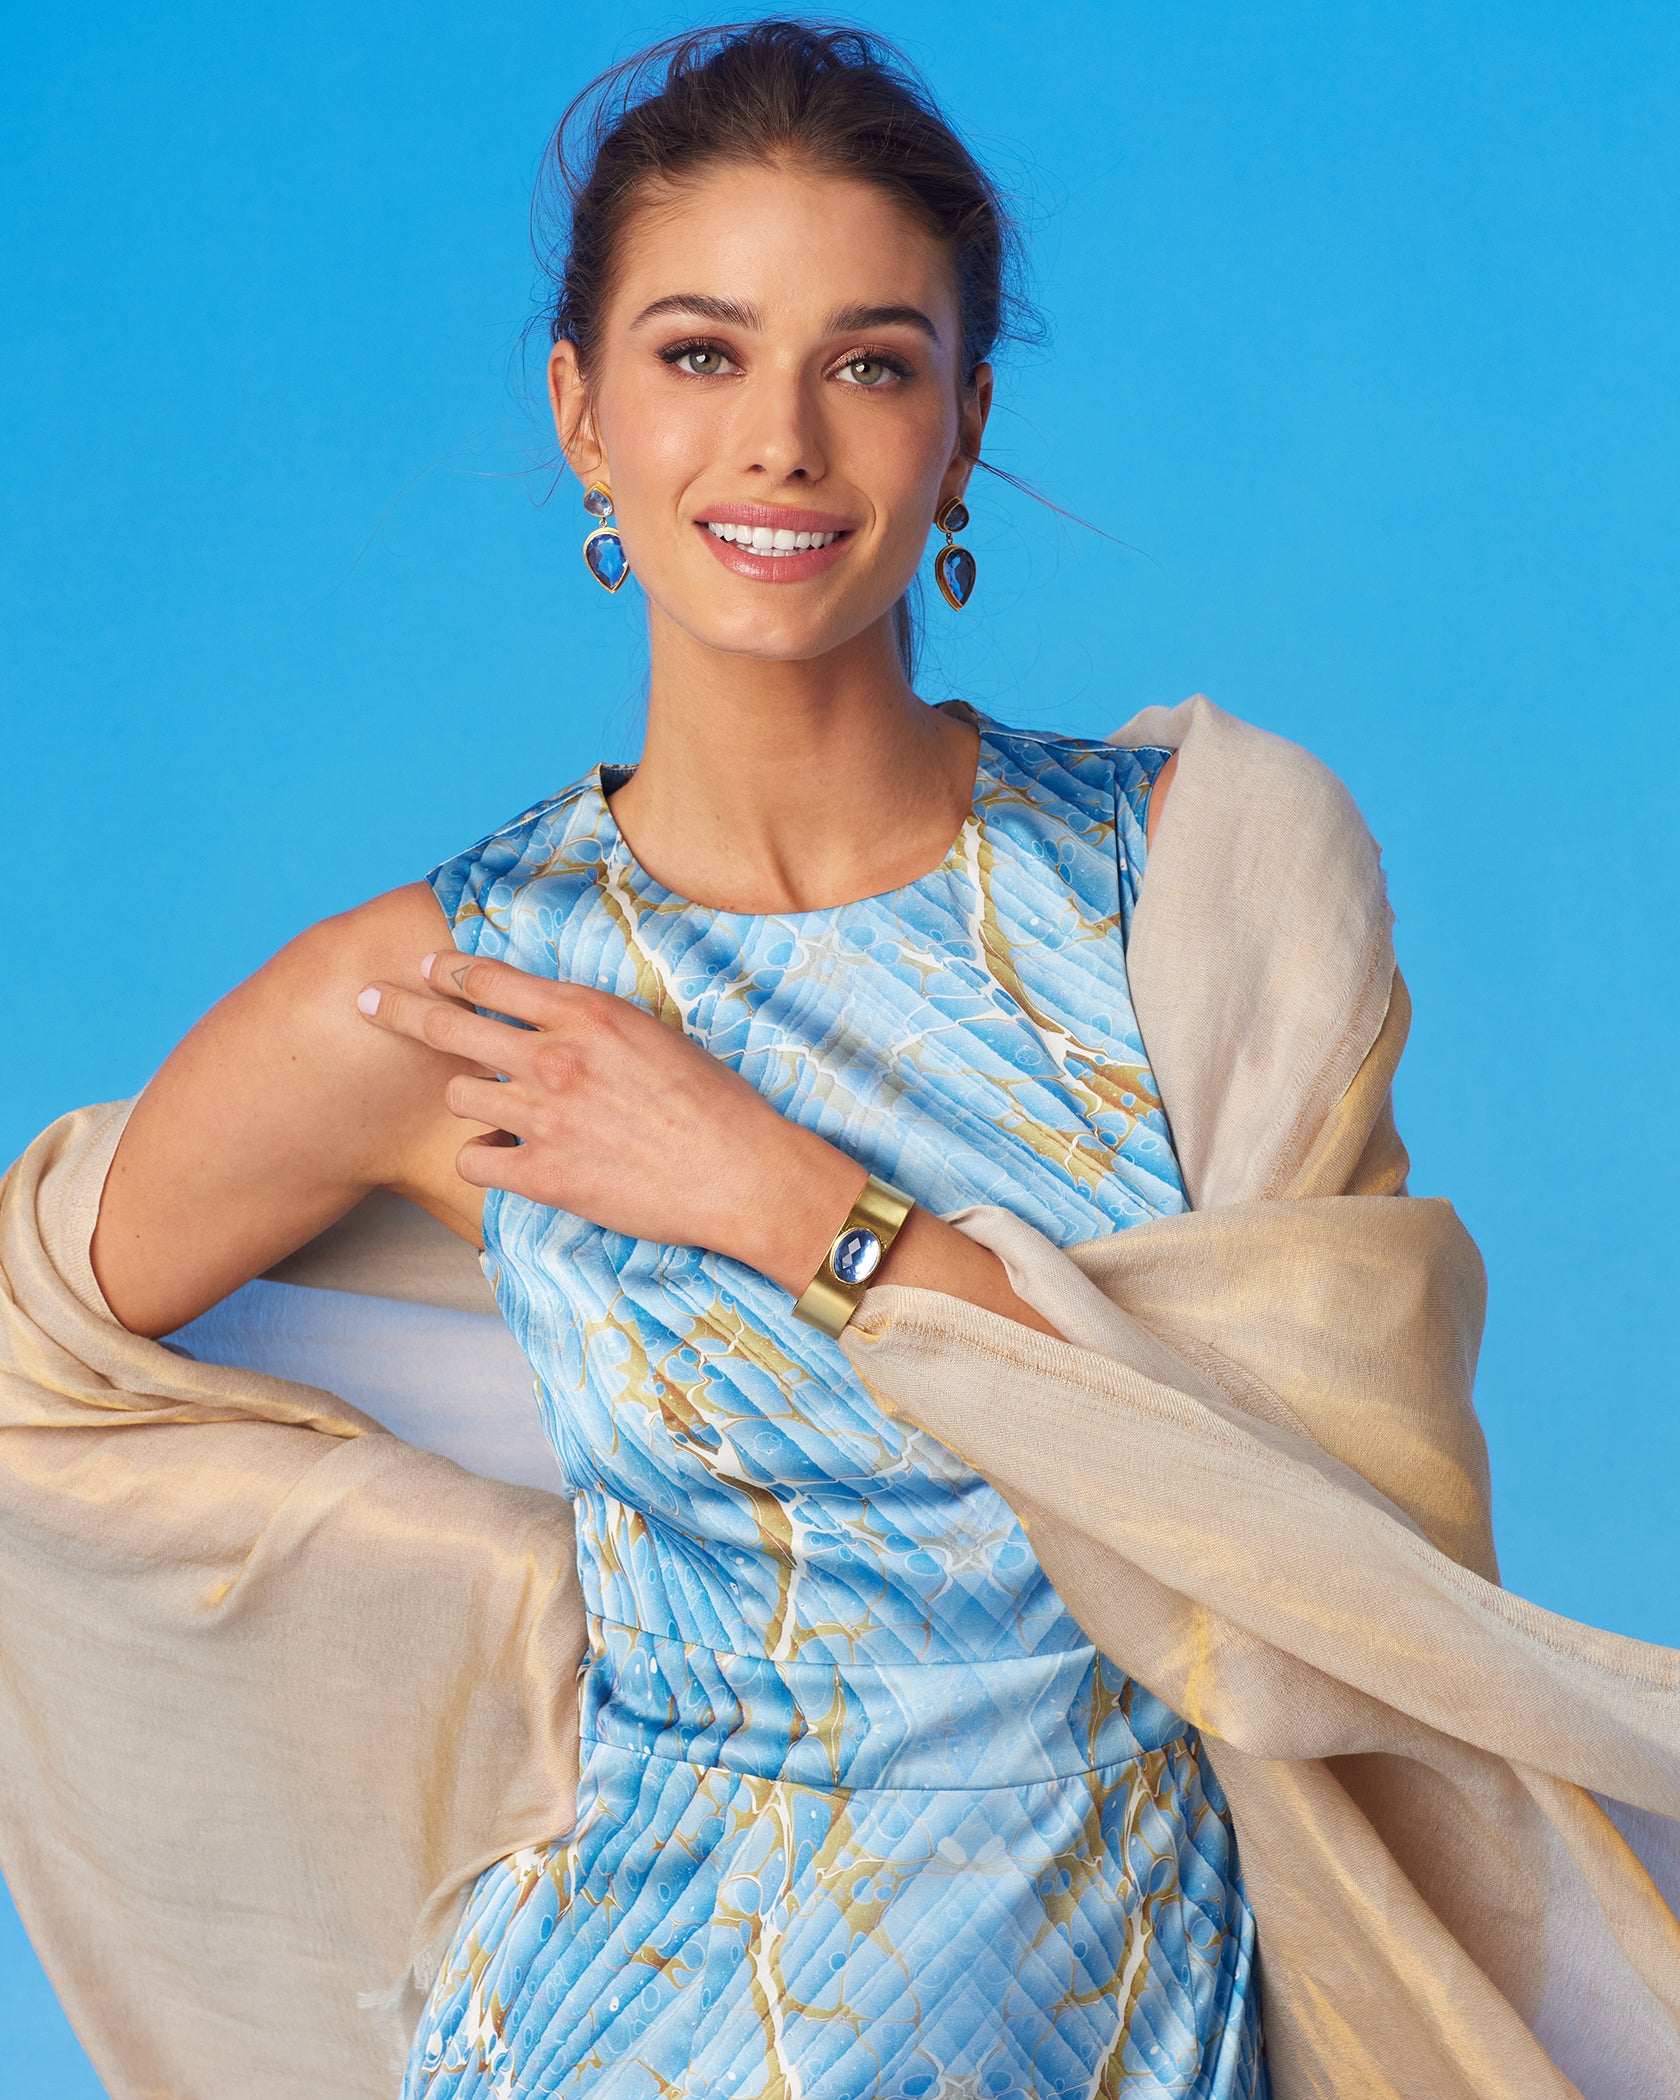 Josephine Reversible Pashmina Shawl in Gold Shimmer Dune-Wearing the Astrid Sheath Dress in Marble Print